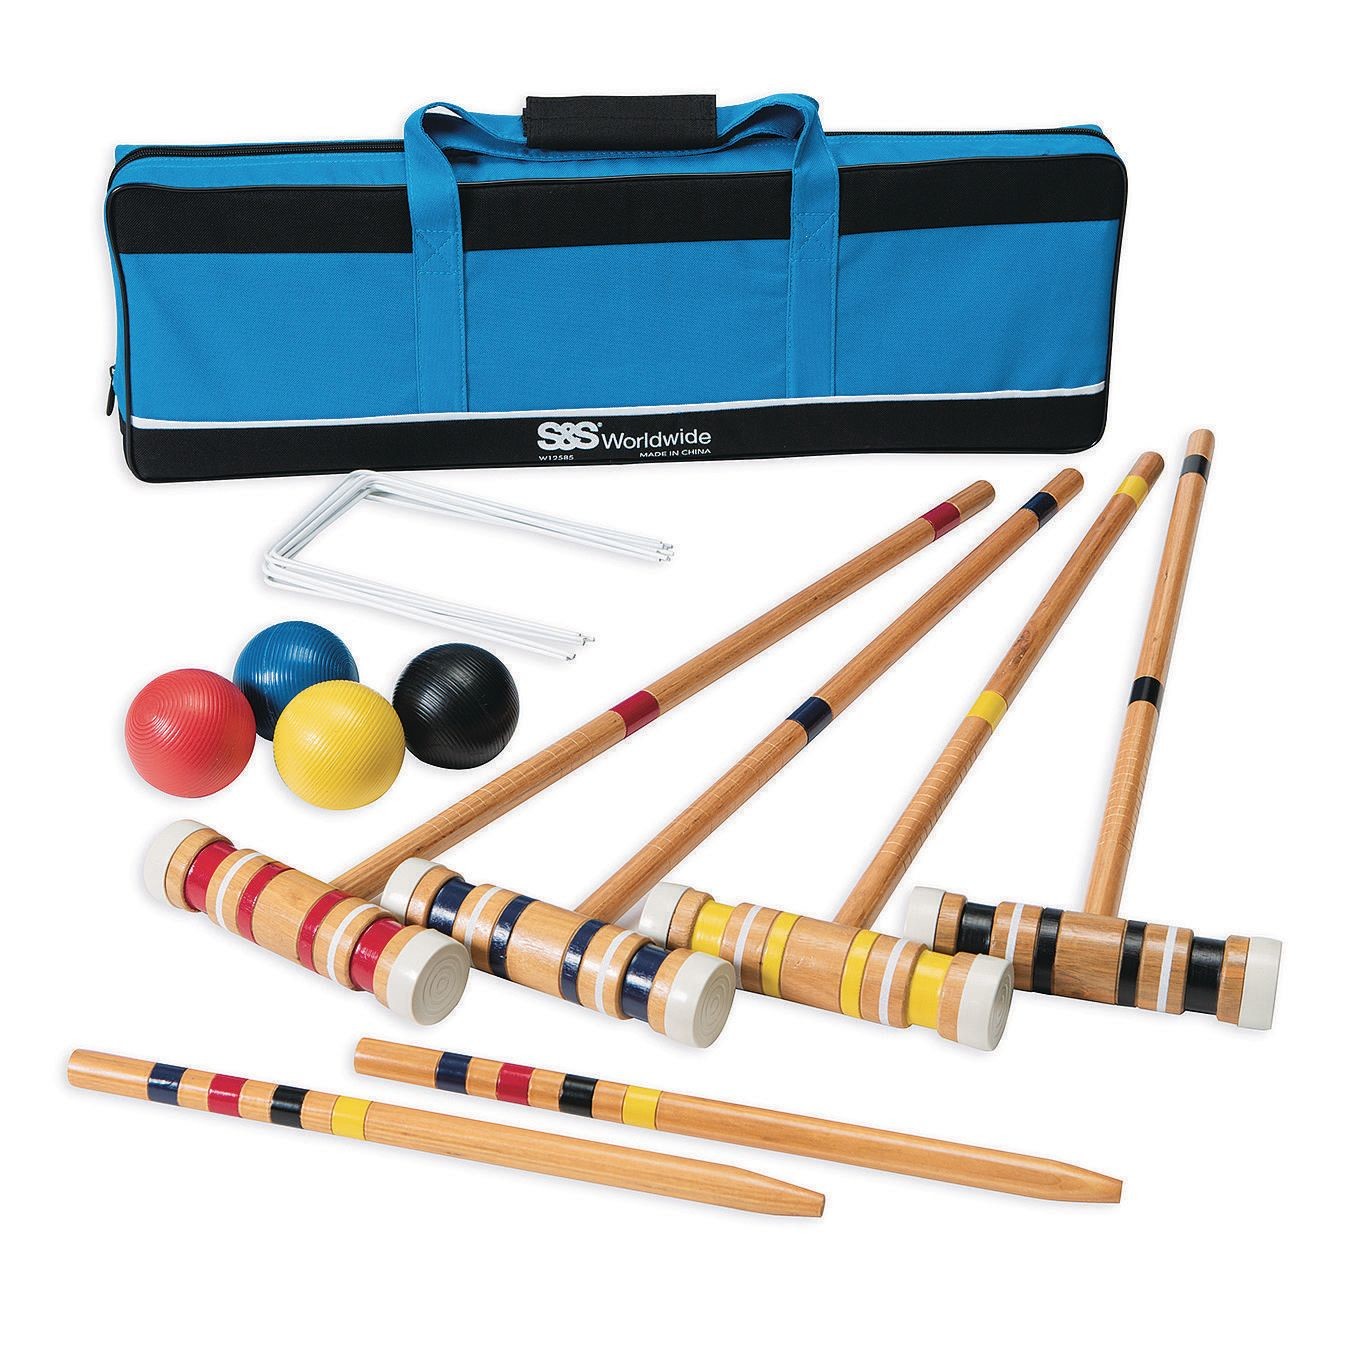 Buy Recreational 4-Player Croquet Set S&S at Worldwide